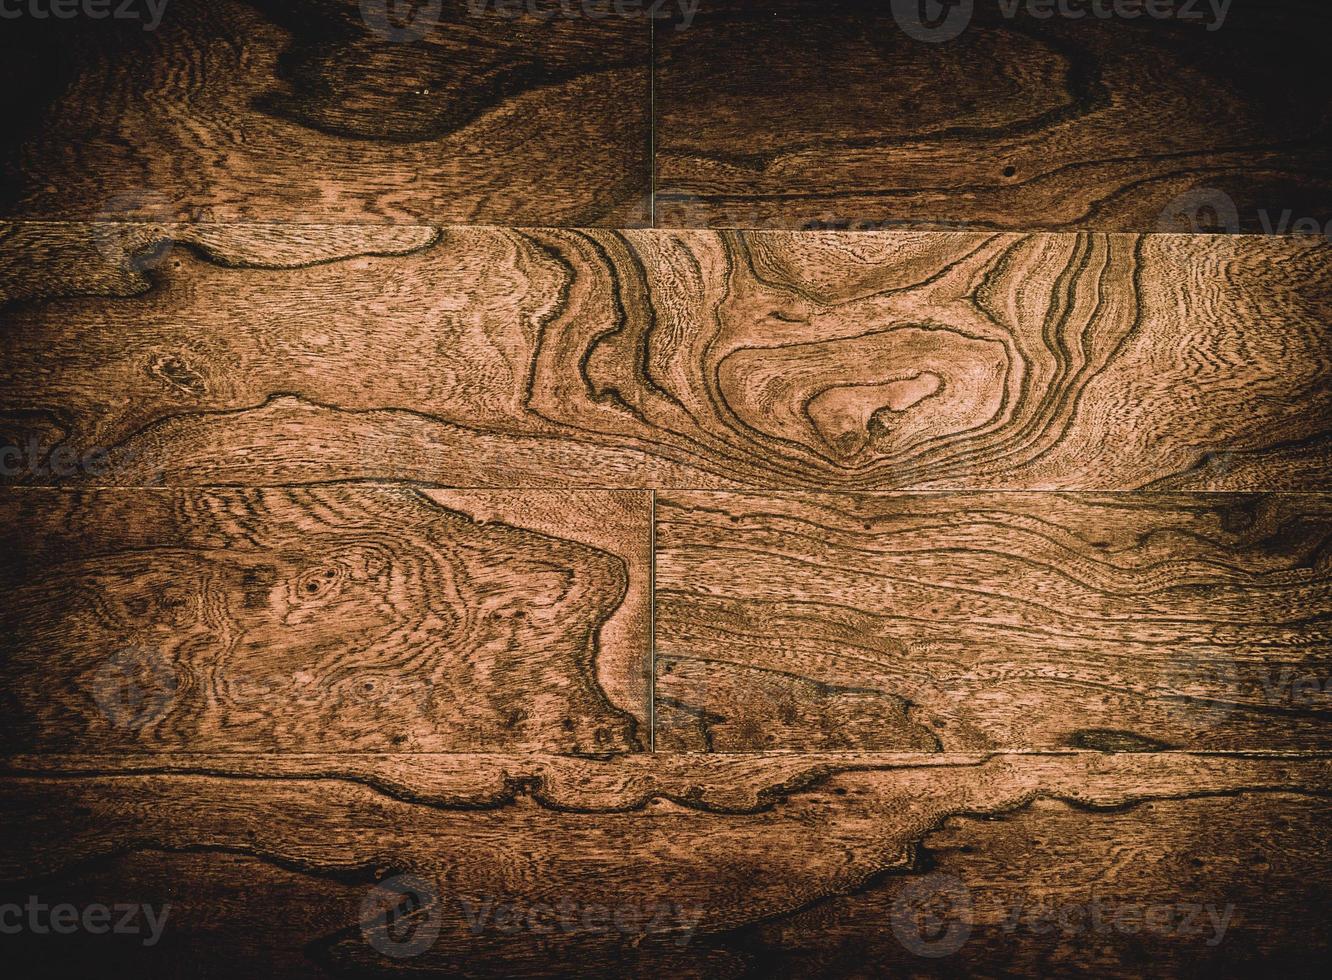 wood texture. background old panels photo